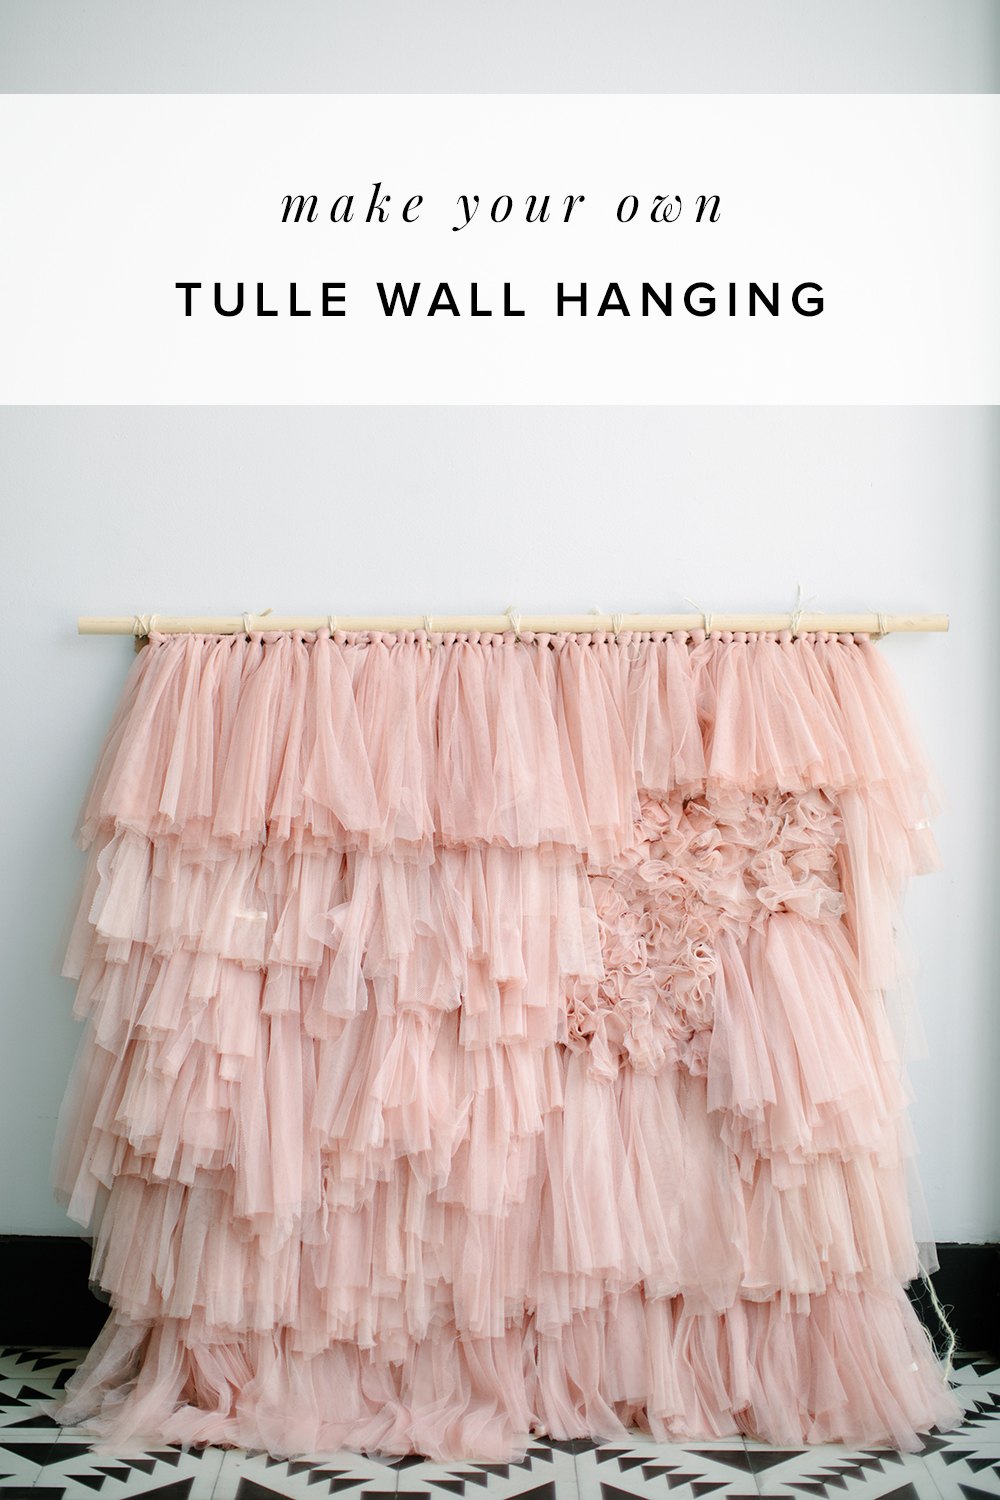 Tulle Fabric Gallery, Decorating with Tulle